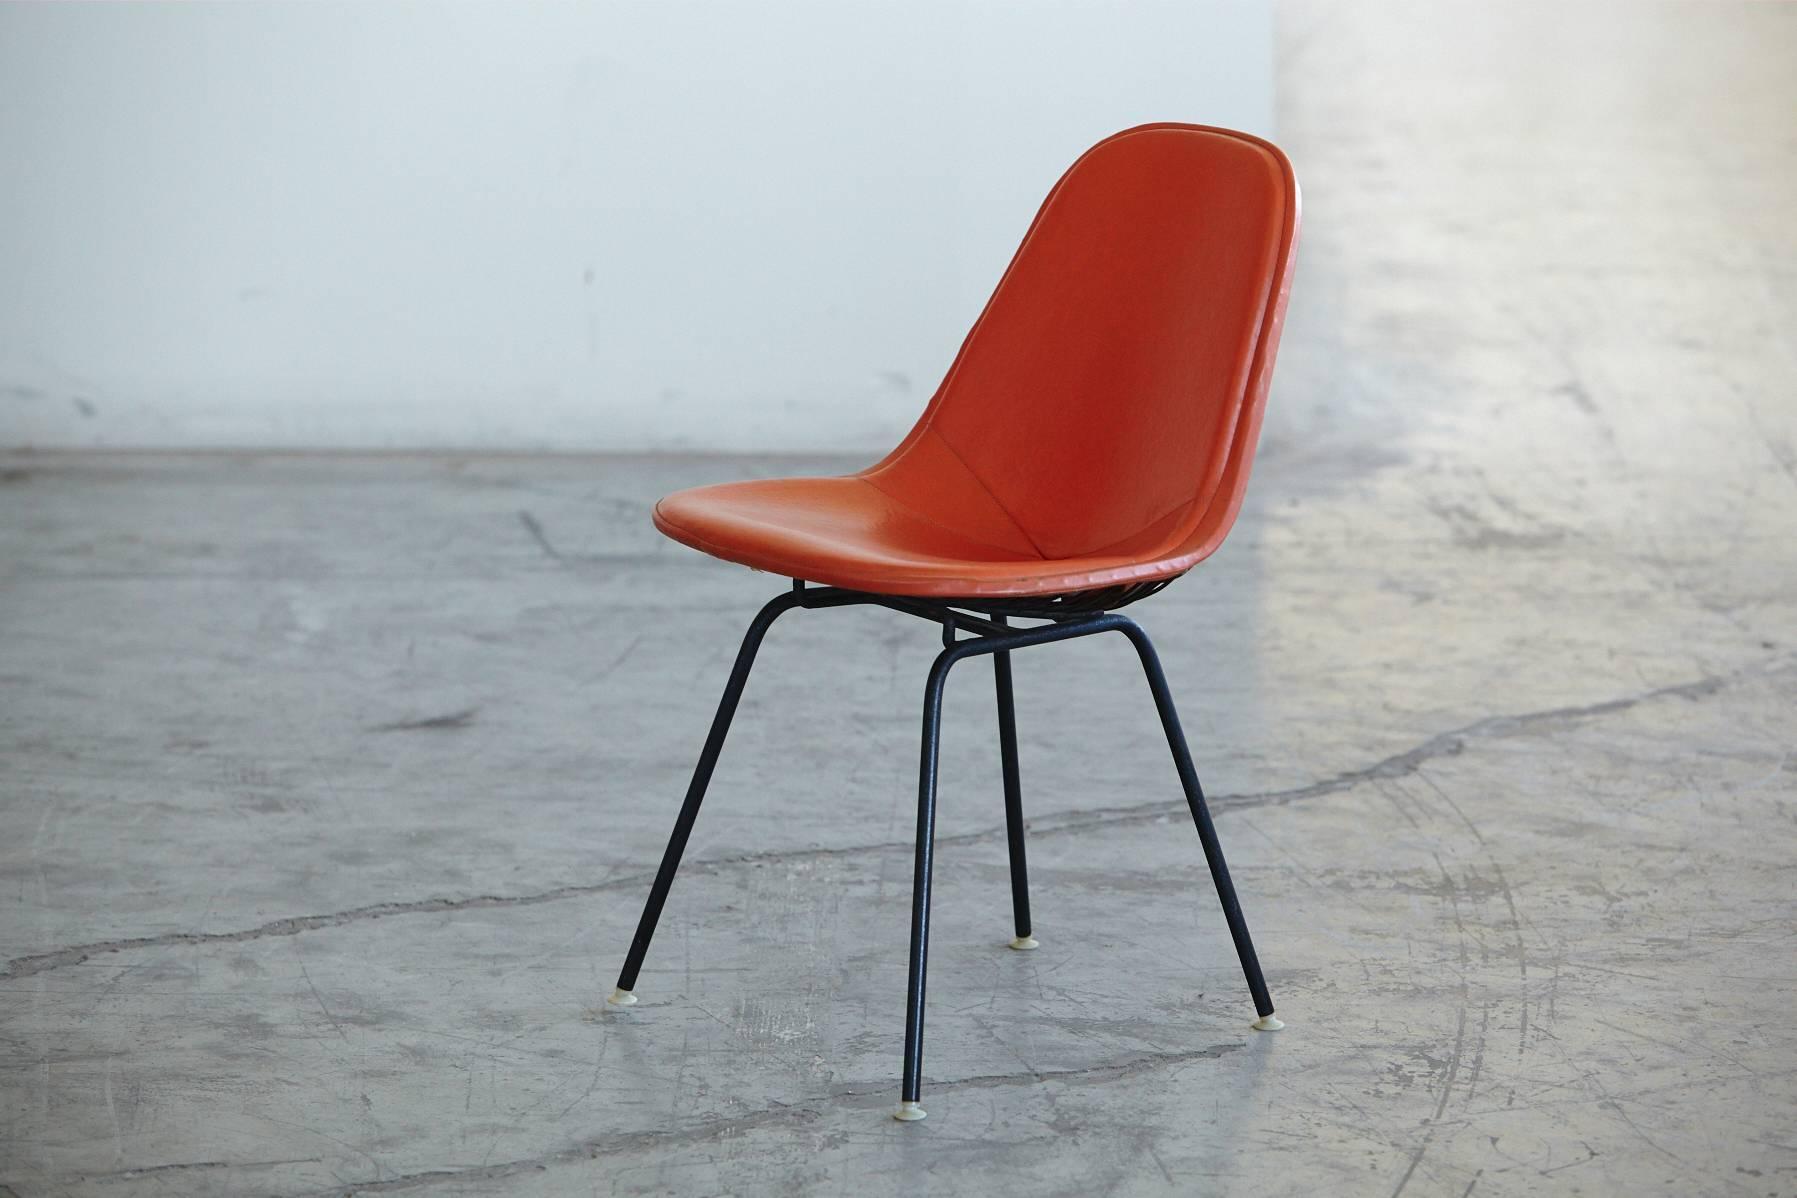 Mid-Century Modern Original Eames DKX-1 Side Chair in Orange Leather for Herman Miller, 1960s For Sale